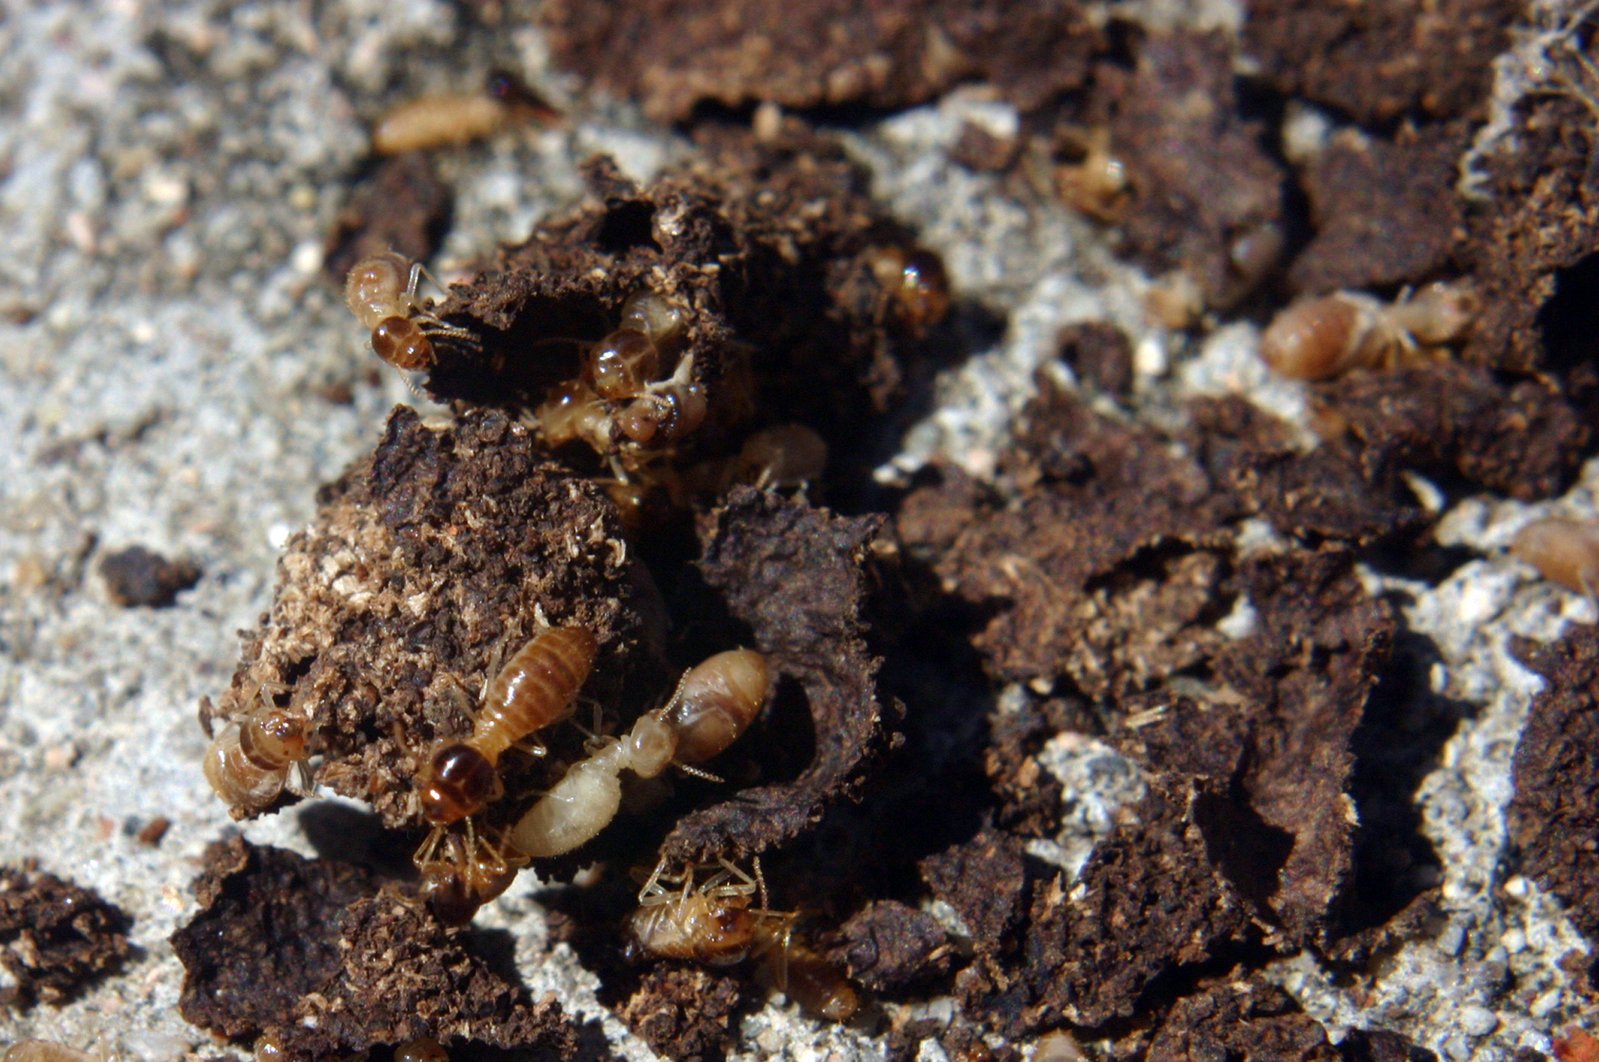 a small group of termites crawling on a white rock